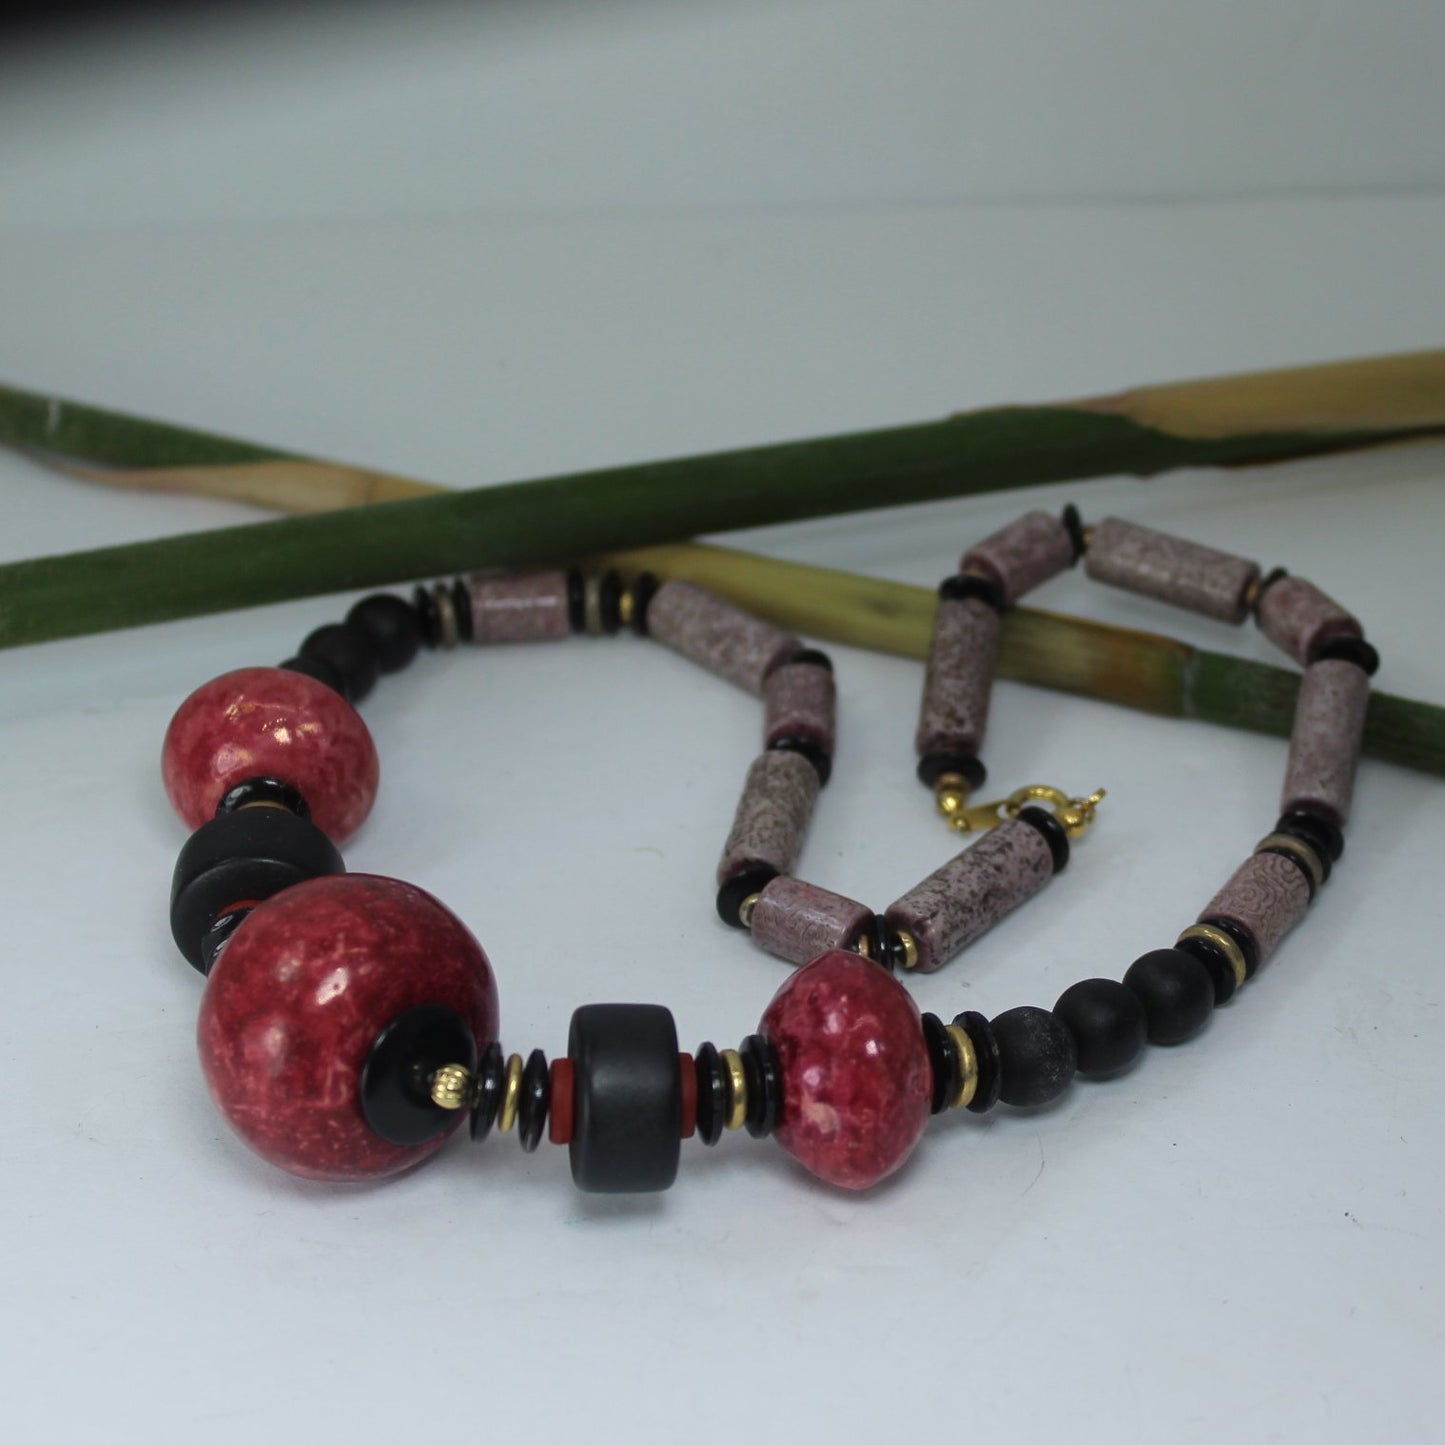 Statement Necklace Outstanding Colors Mauve Raspberry Black Beads Large Round Tube Japan table view necklace